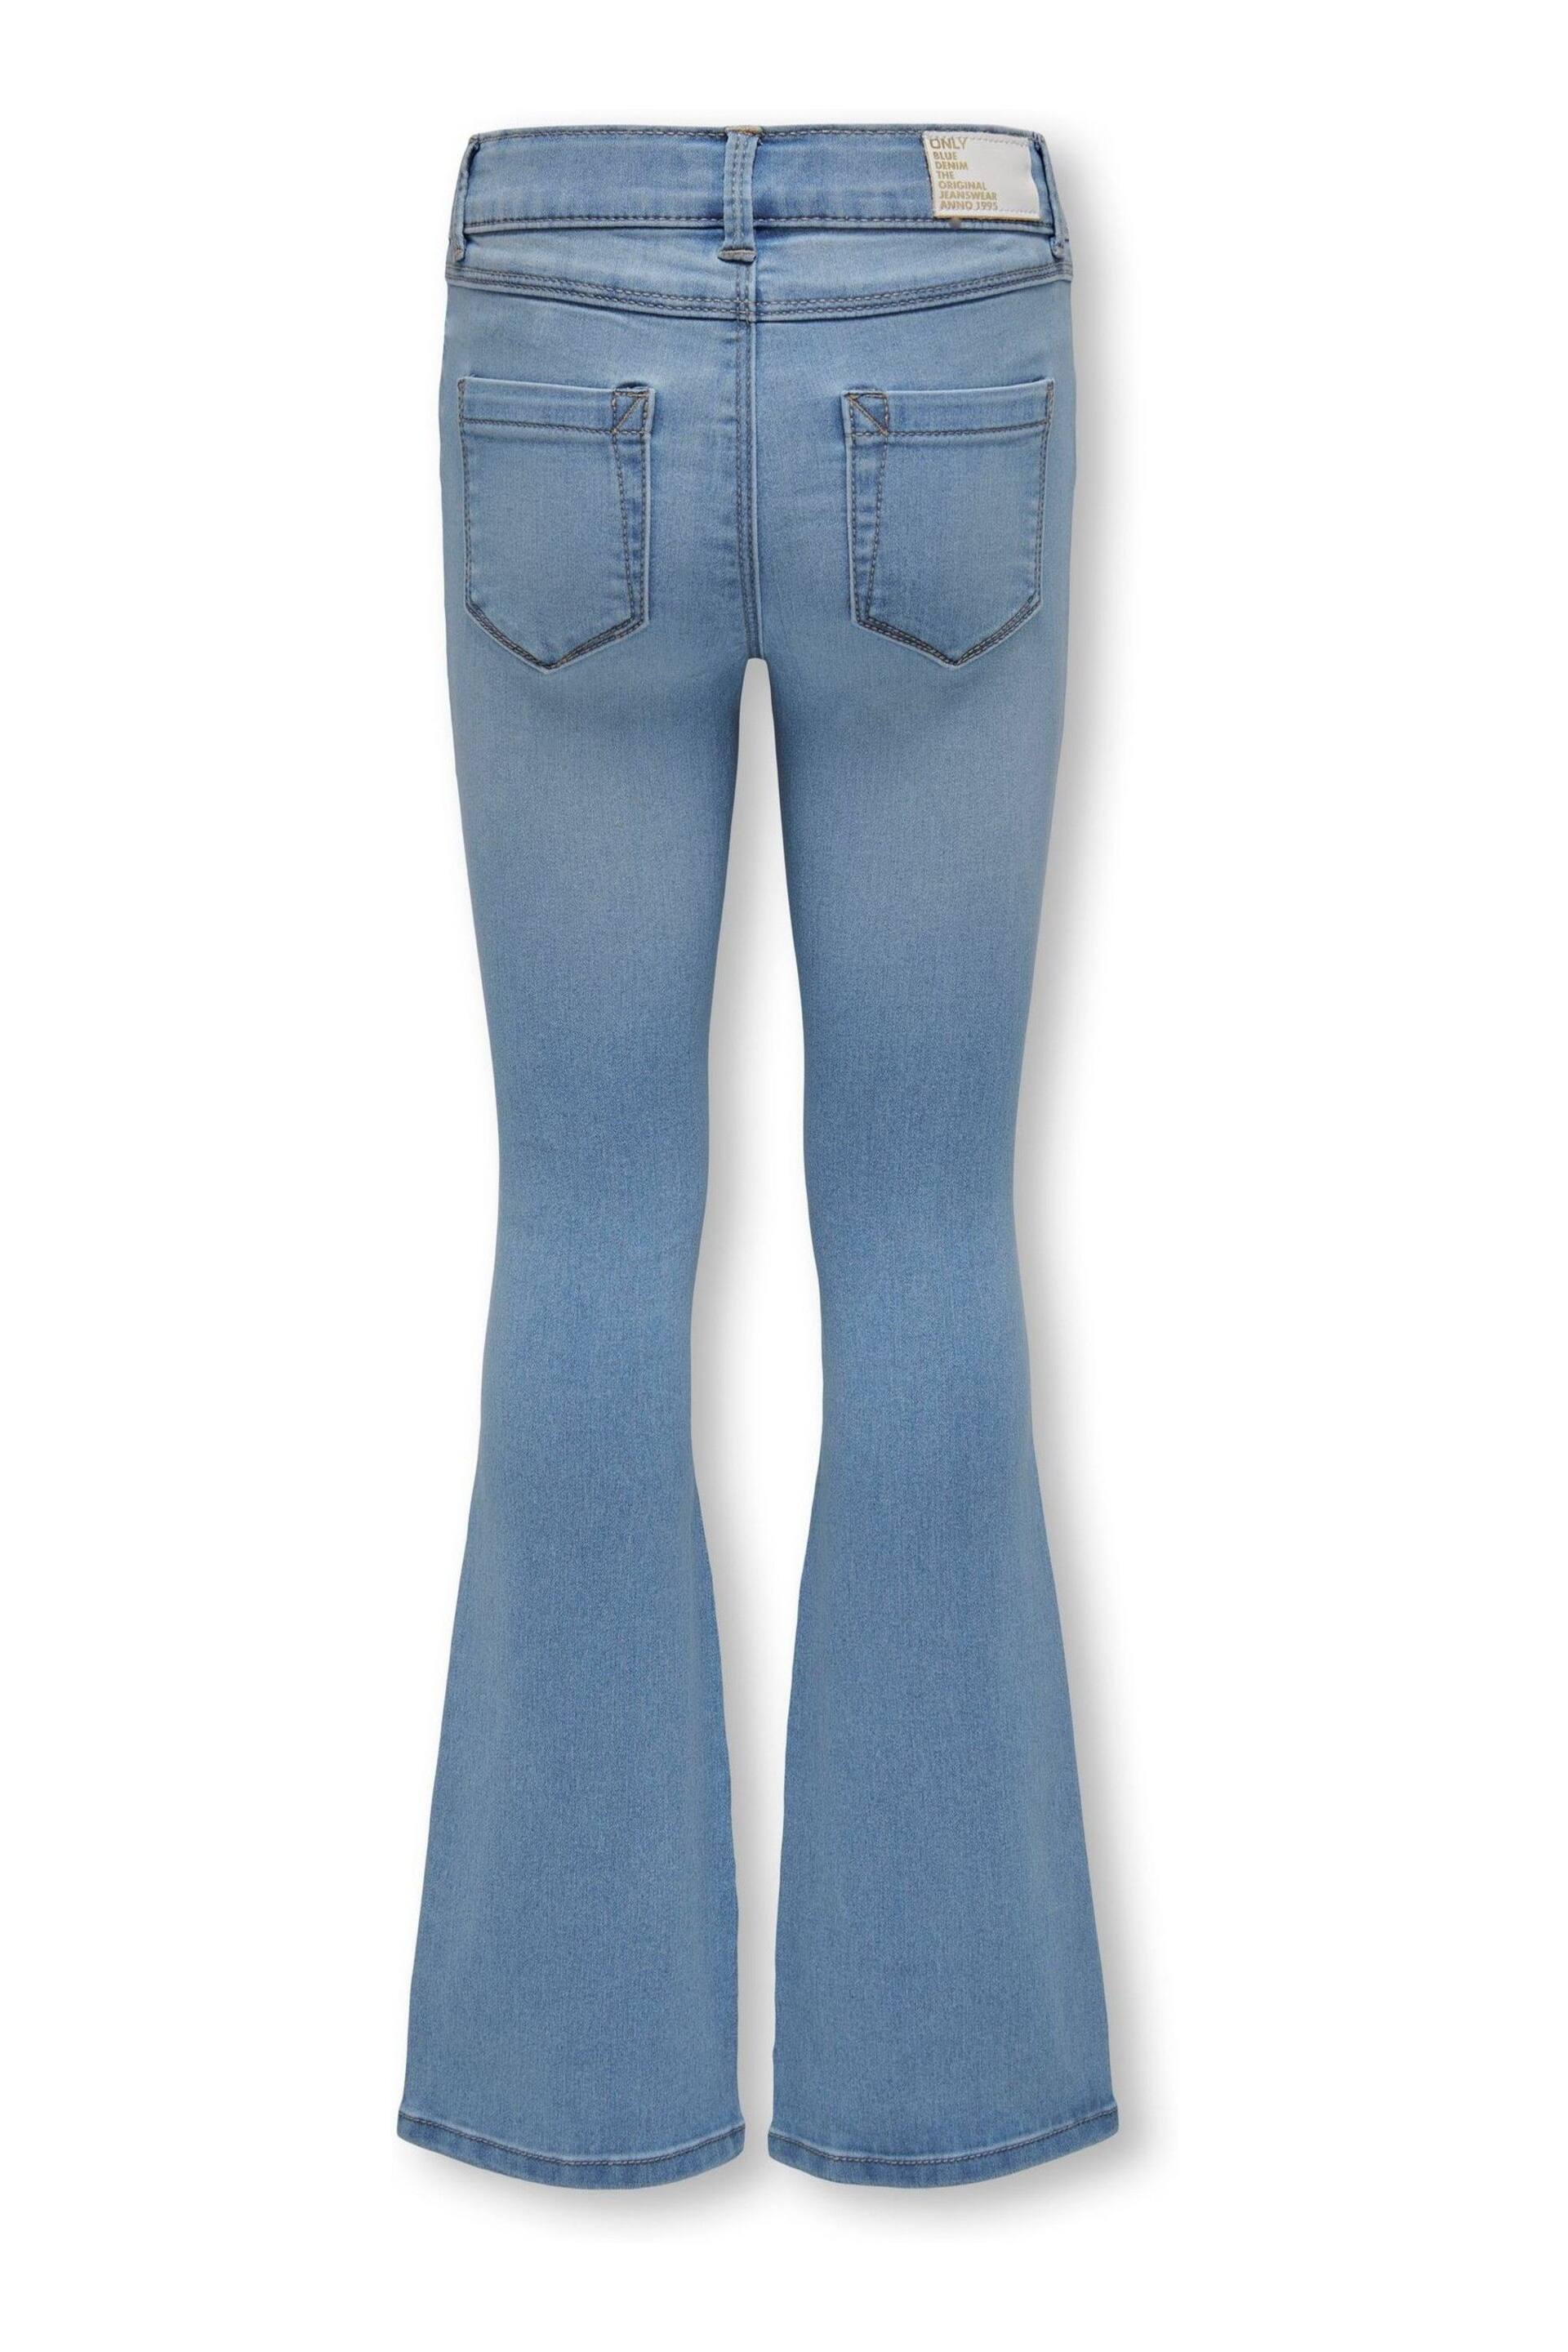 ONLY KIDS Flare Leg Jeans With Adjustable Waist - Image 2 of 2